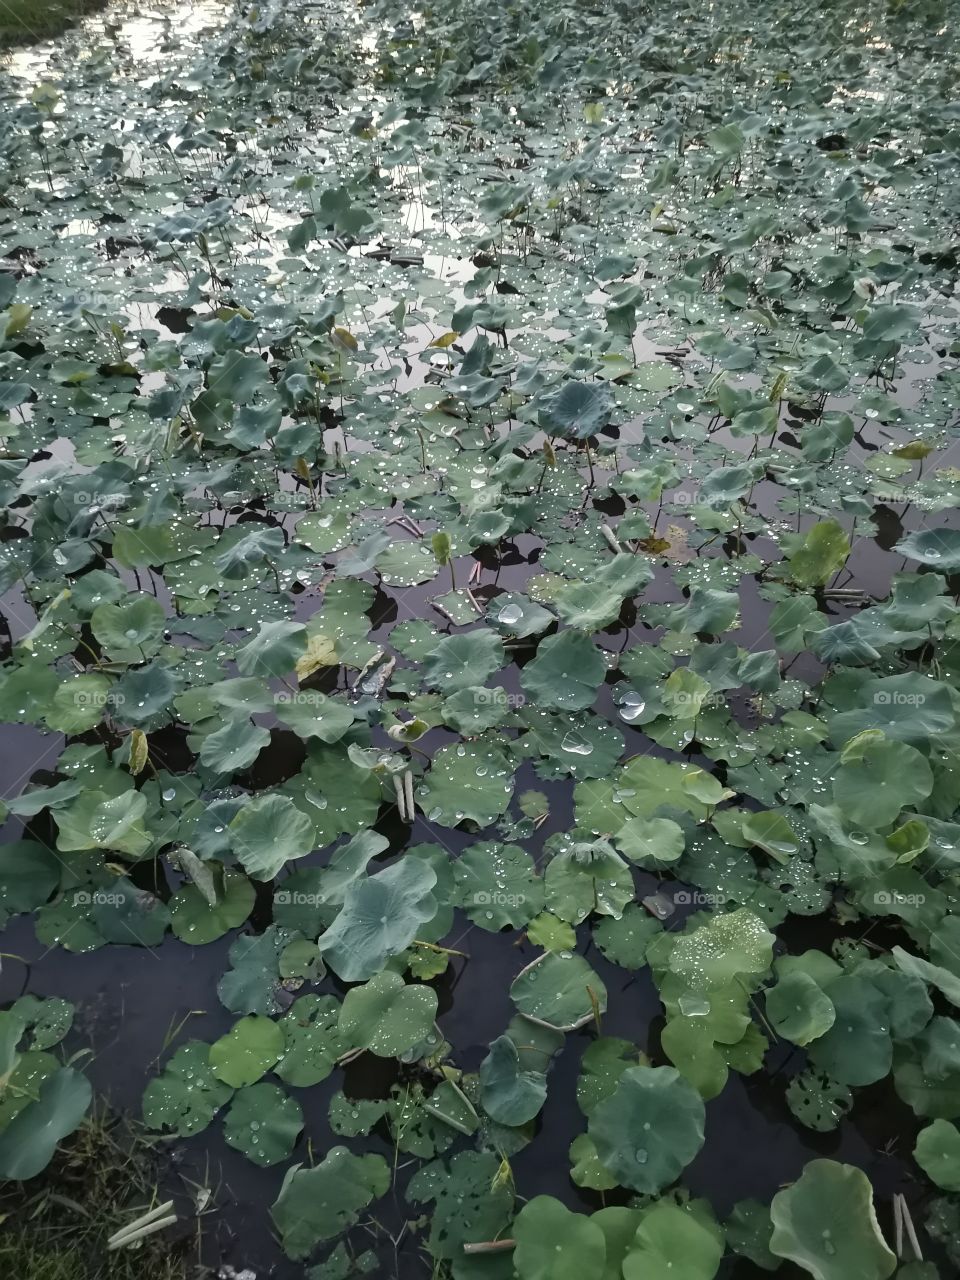 Water Leaves on a Lake